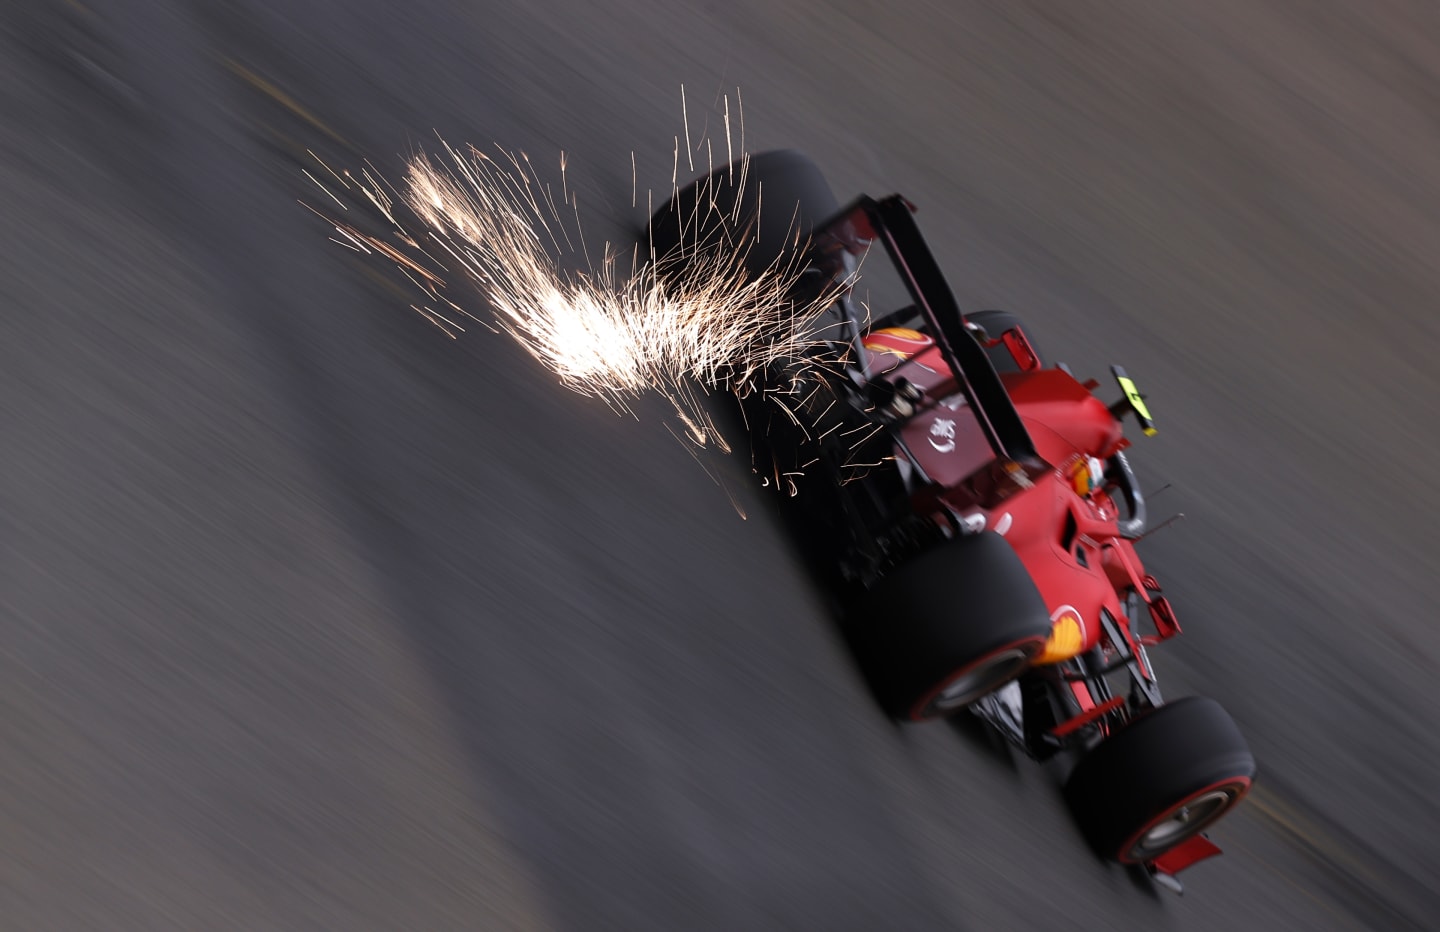 SPA, BELGIUM - AUGUST 27: Sparks fly behind Carlos Sainz of Spain driving the (55) Scuderia Ferrari SF21 during practice ahead of the F1 Grand Prix of Belgium at Circuit de Spa-Francorchamps on August 27, 2021 in Spa, Belgium. (Photo by Lars Baron/Getty Images)